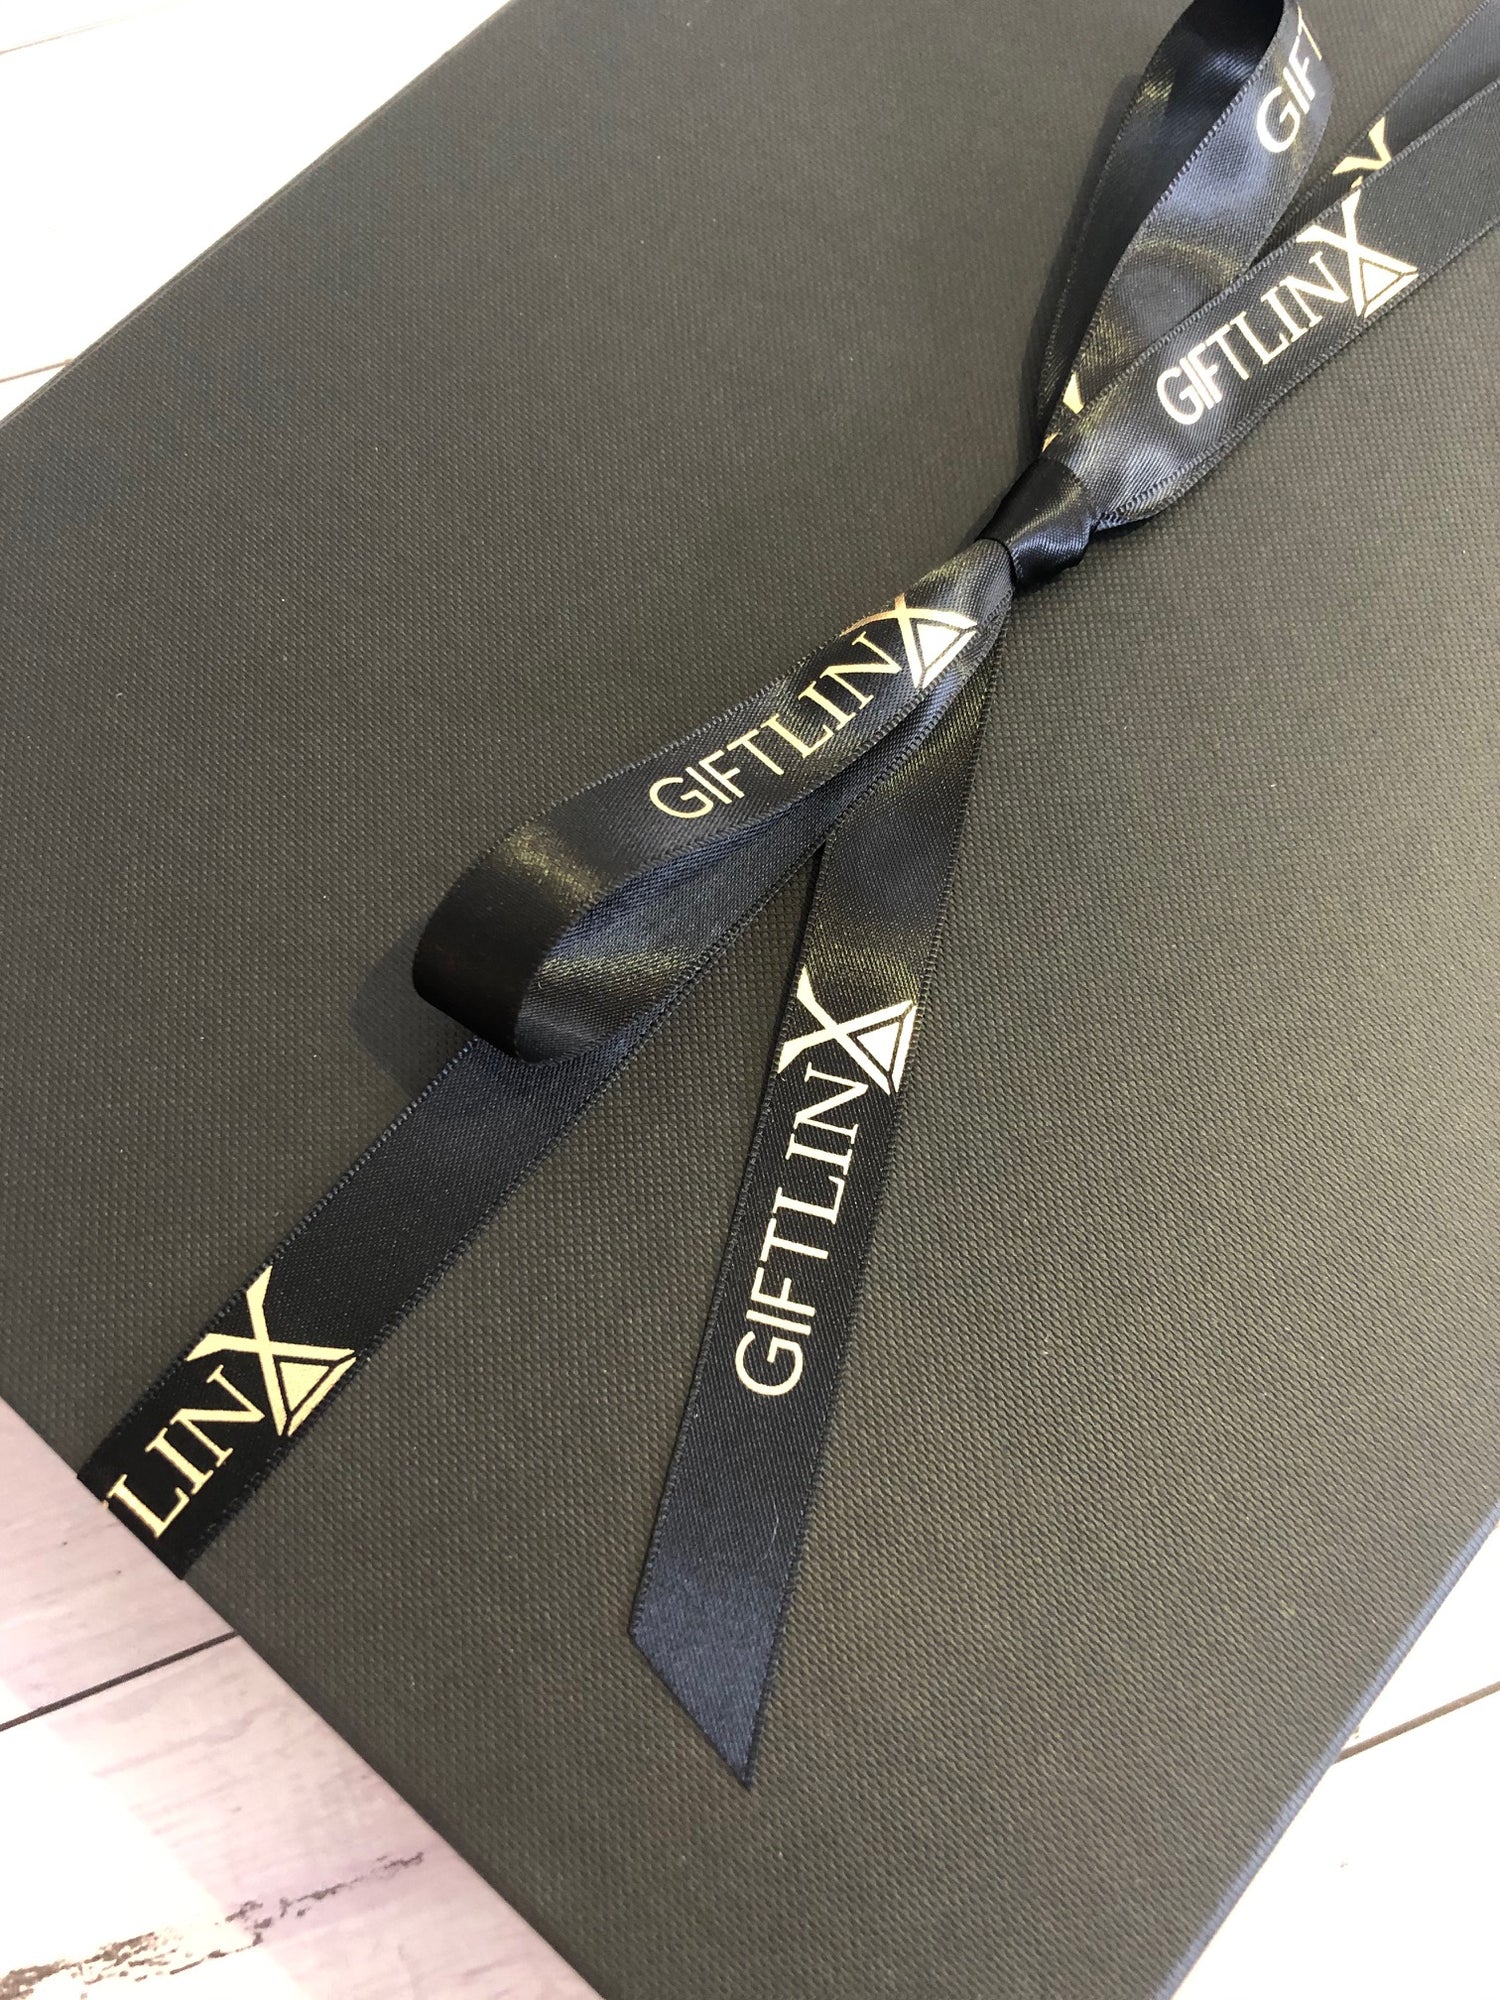 Branded ribbon tied in a bow on a luxury black gift box.